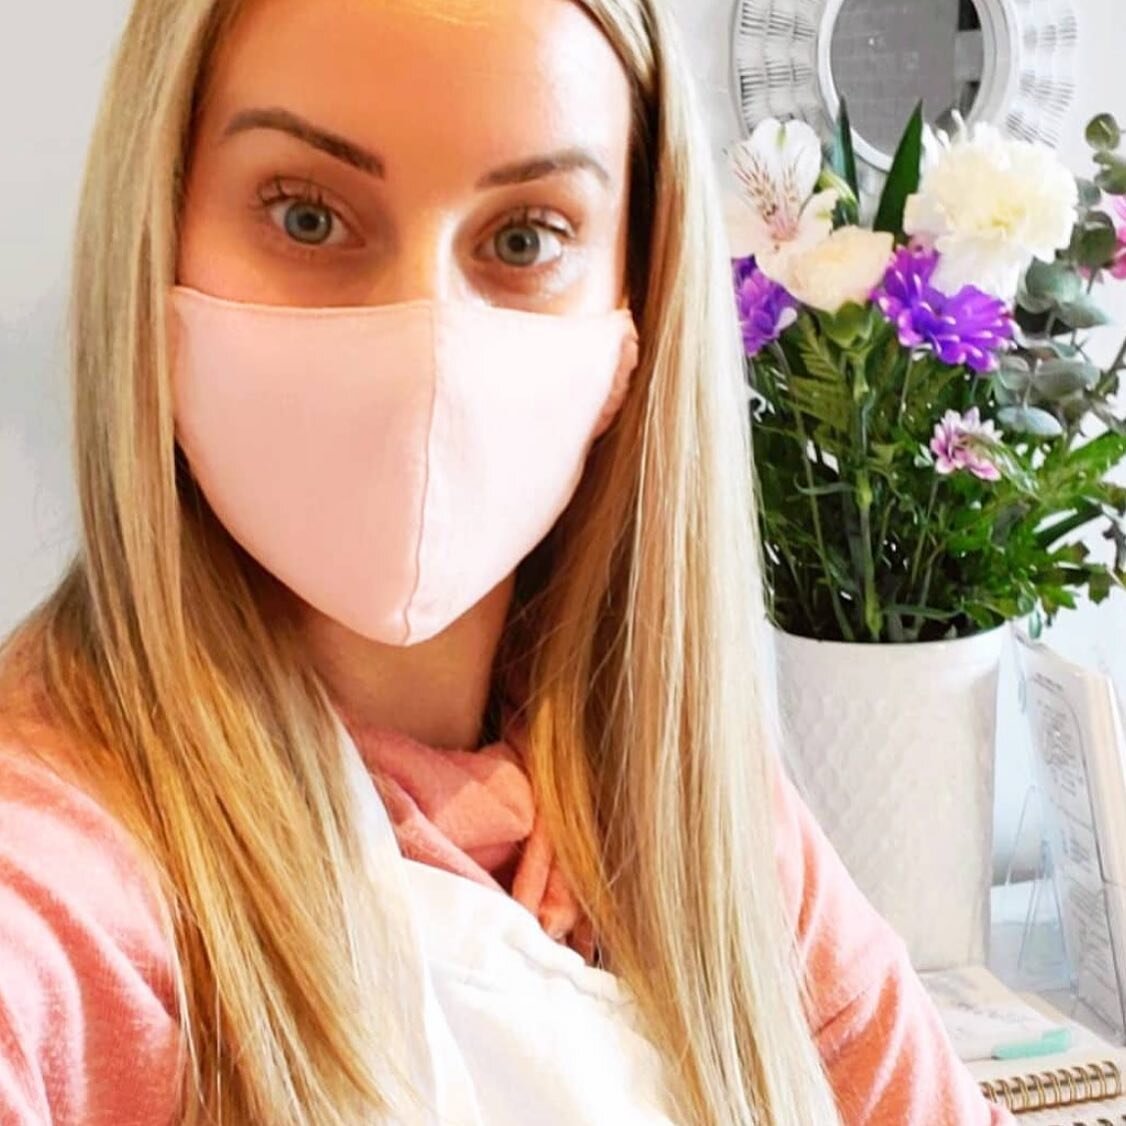 A message for our amazing clients: with the lifting of mask restrictions coming on Monday, we want to ensure that you all feel comfortable while visiting Esm&eacute;. We understand that this will look different for everyone as we all make this transi